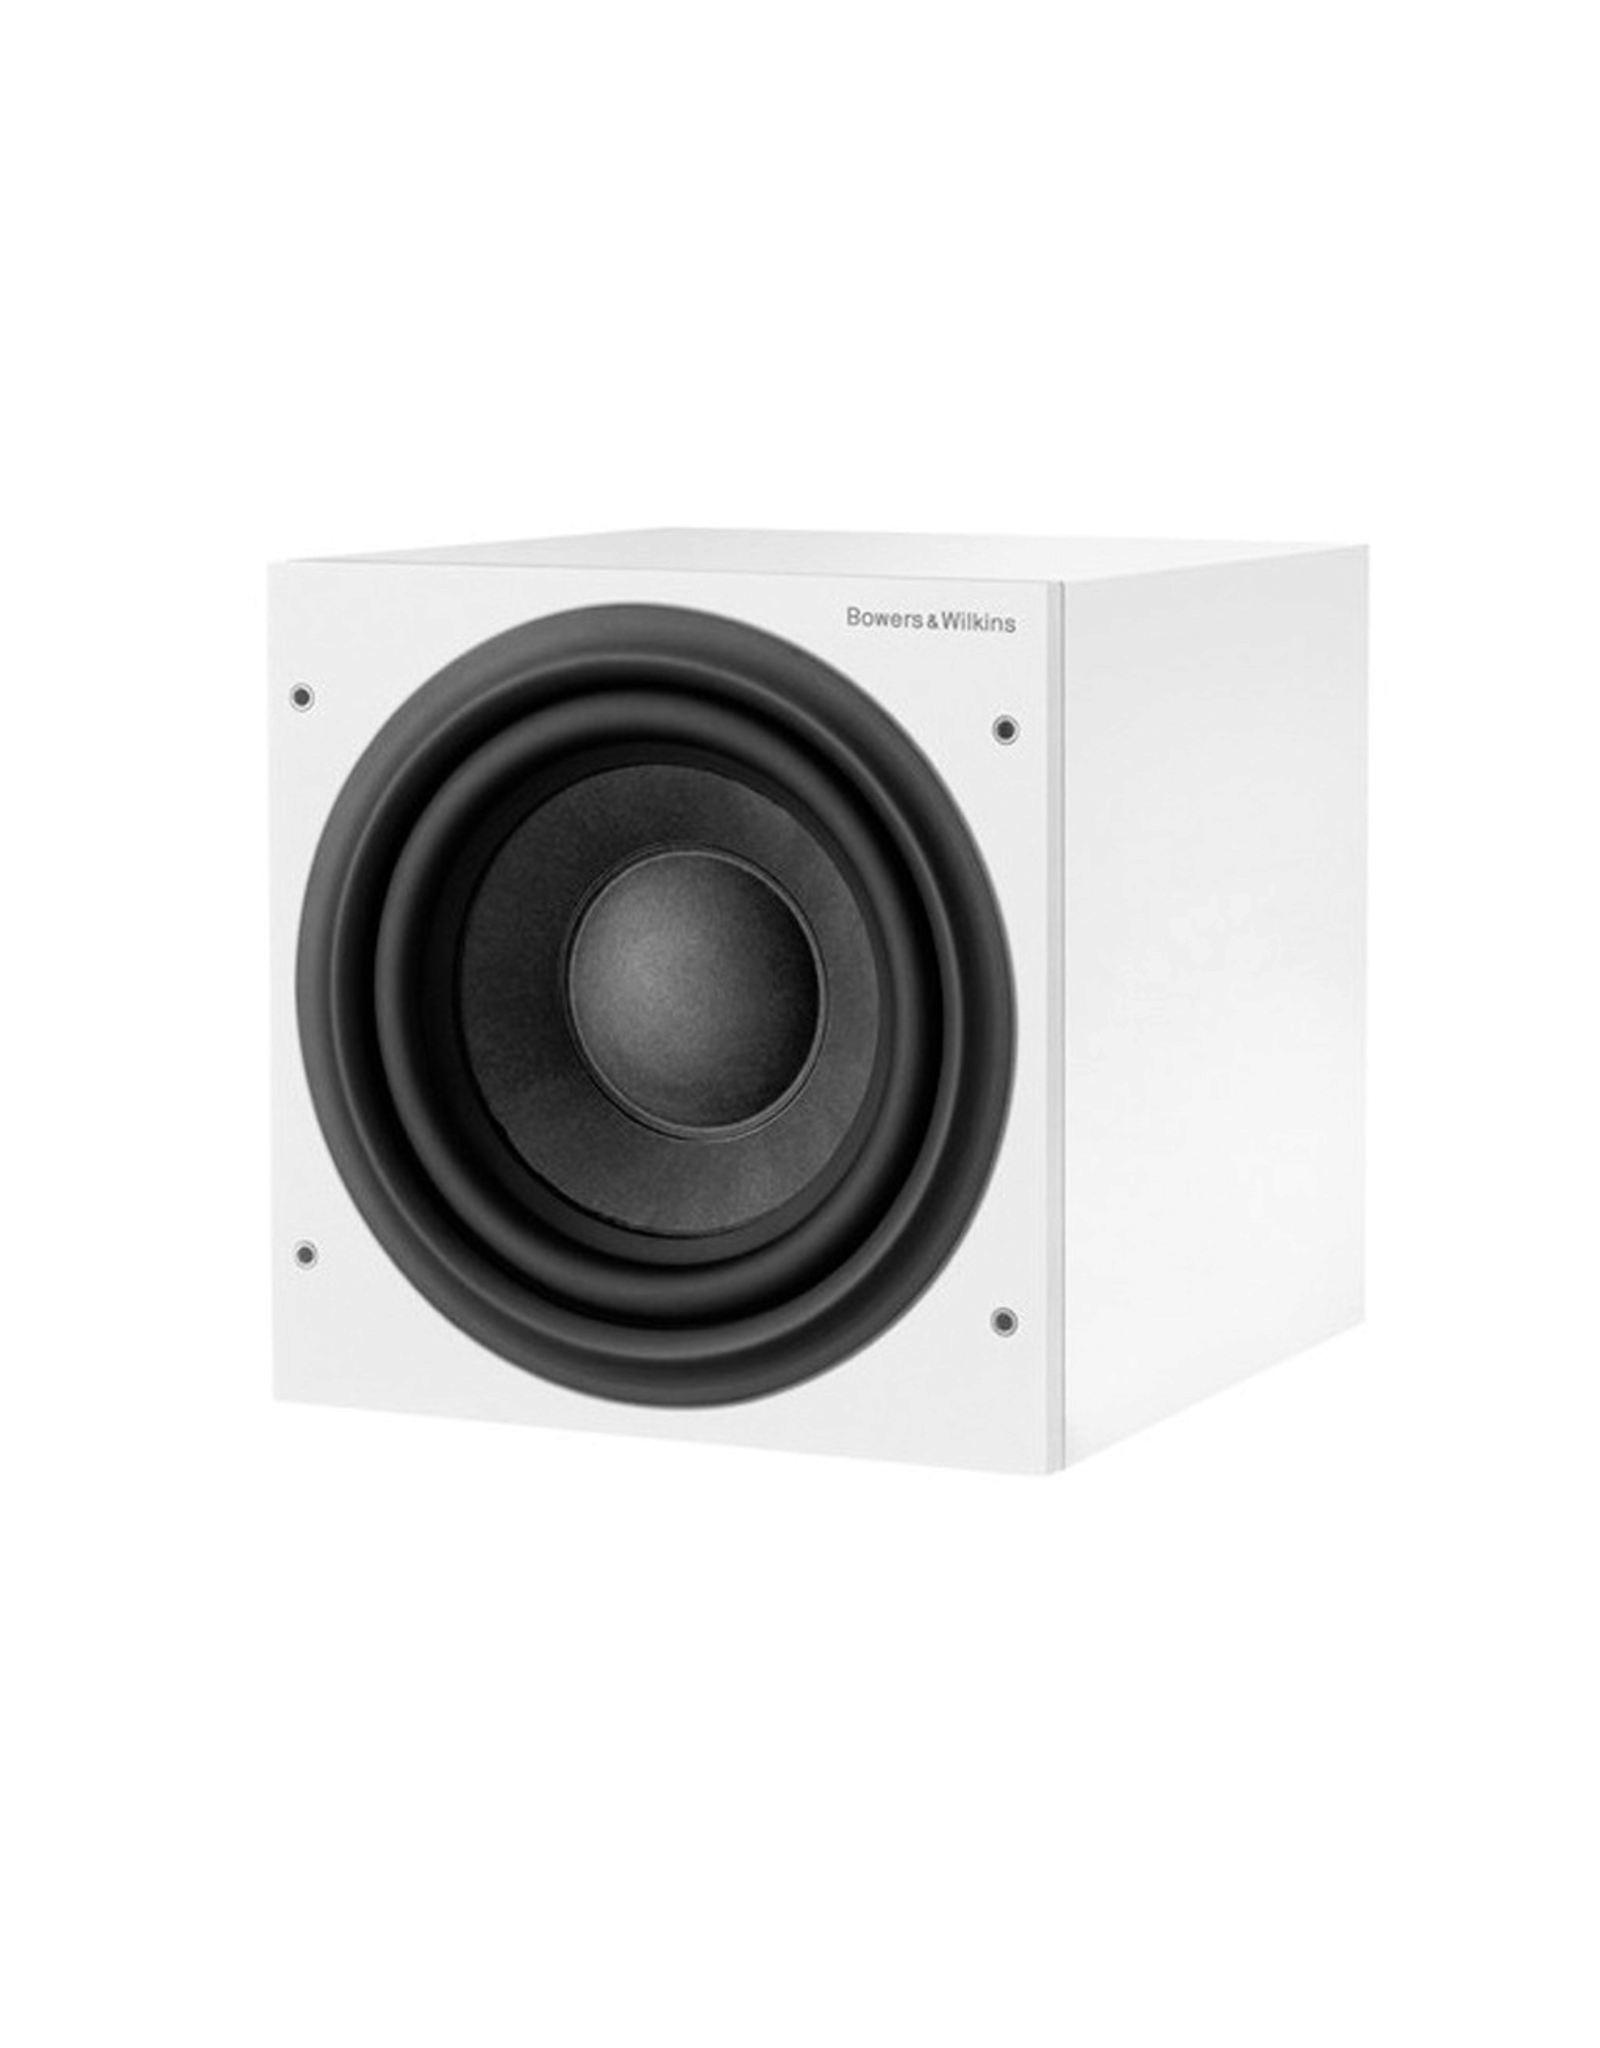 BOWERS & WILKINS B&W ASW610 Subwoofer